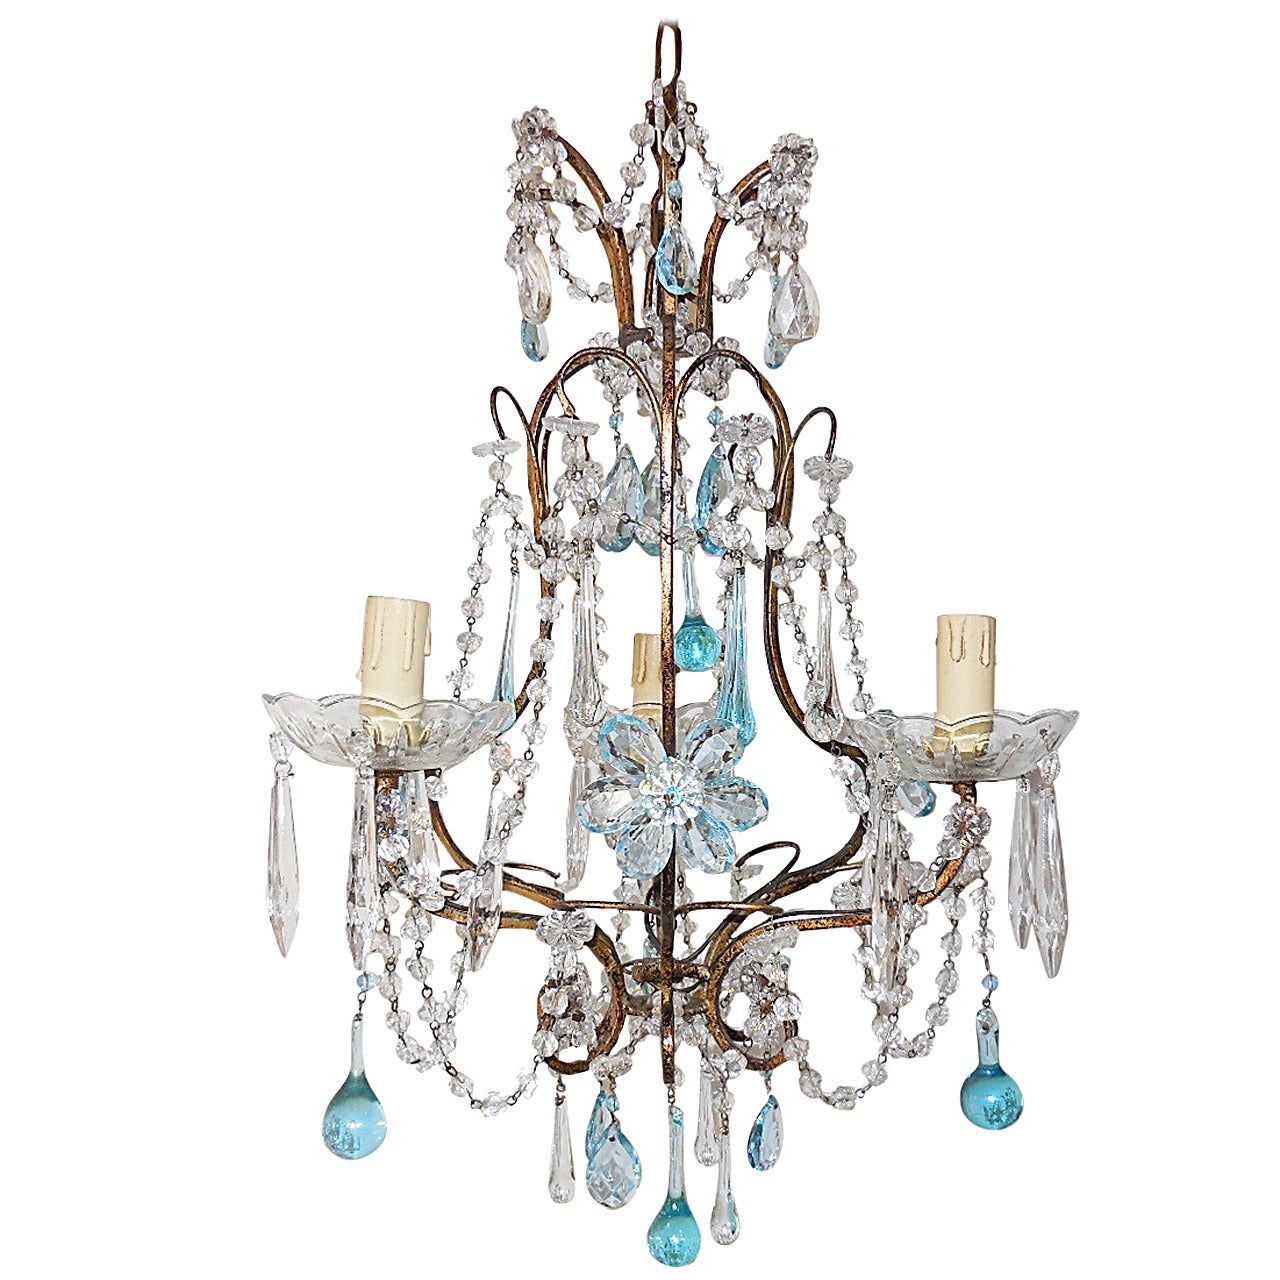 French Aqua Crystal Prisms, Drops and Flowers Chandelier, circa 1920 For Sale